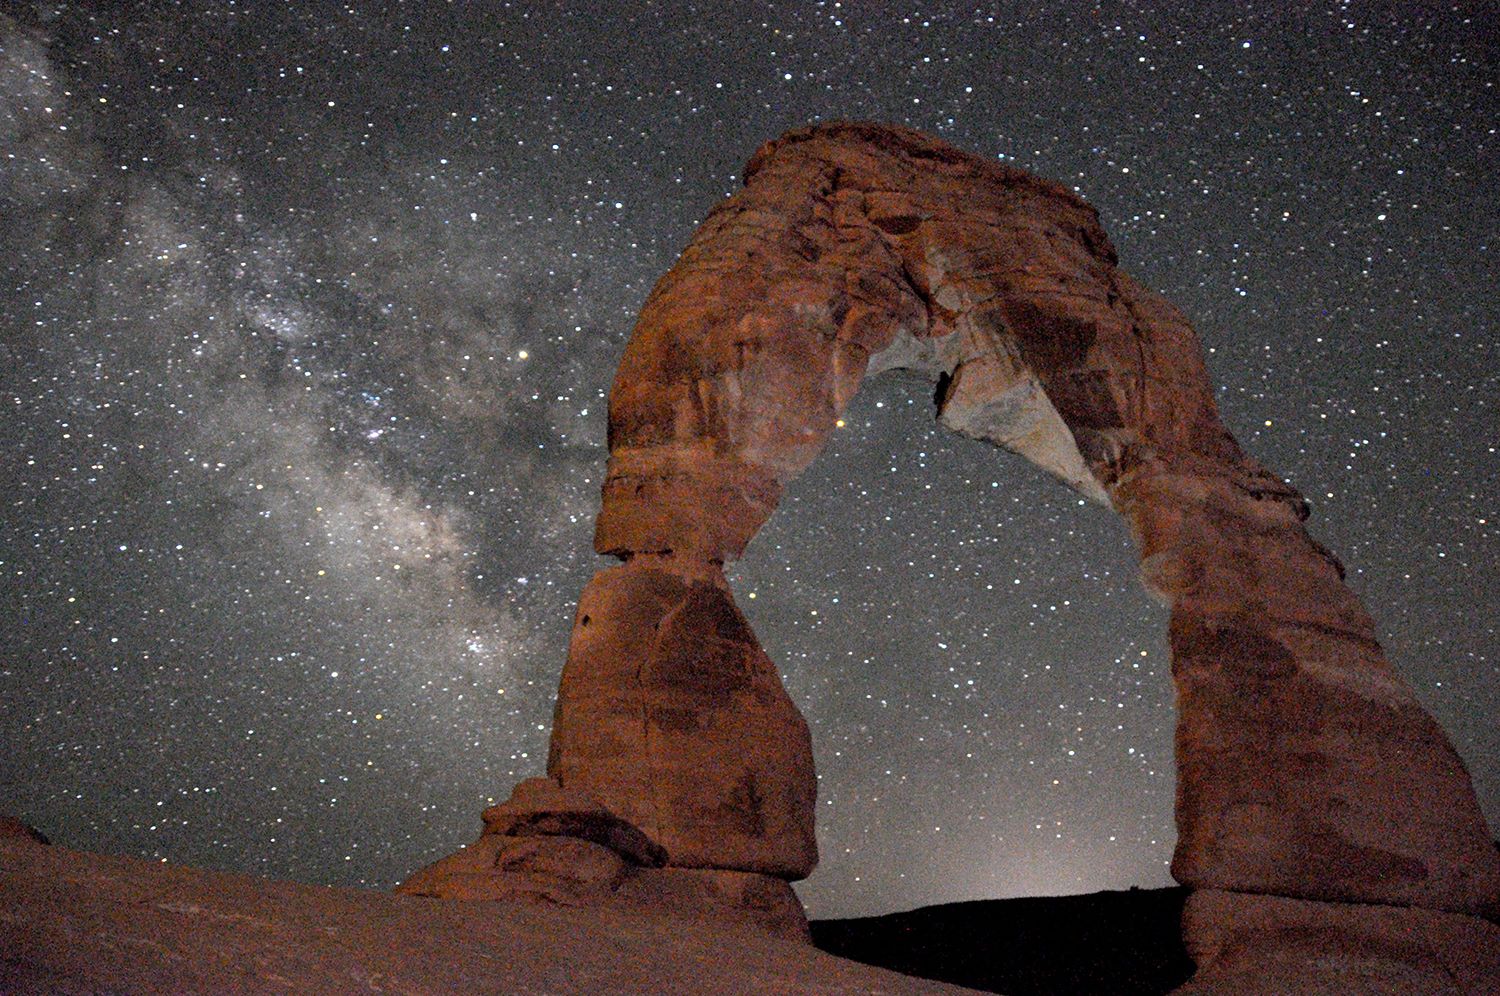 Nighttime Delicate Arch Milky Way Arches National Park